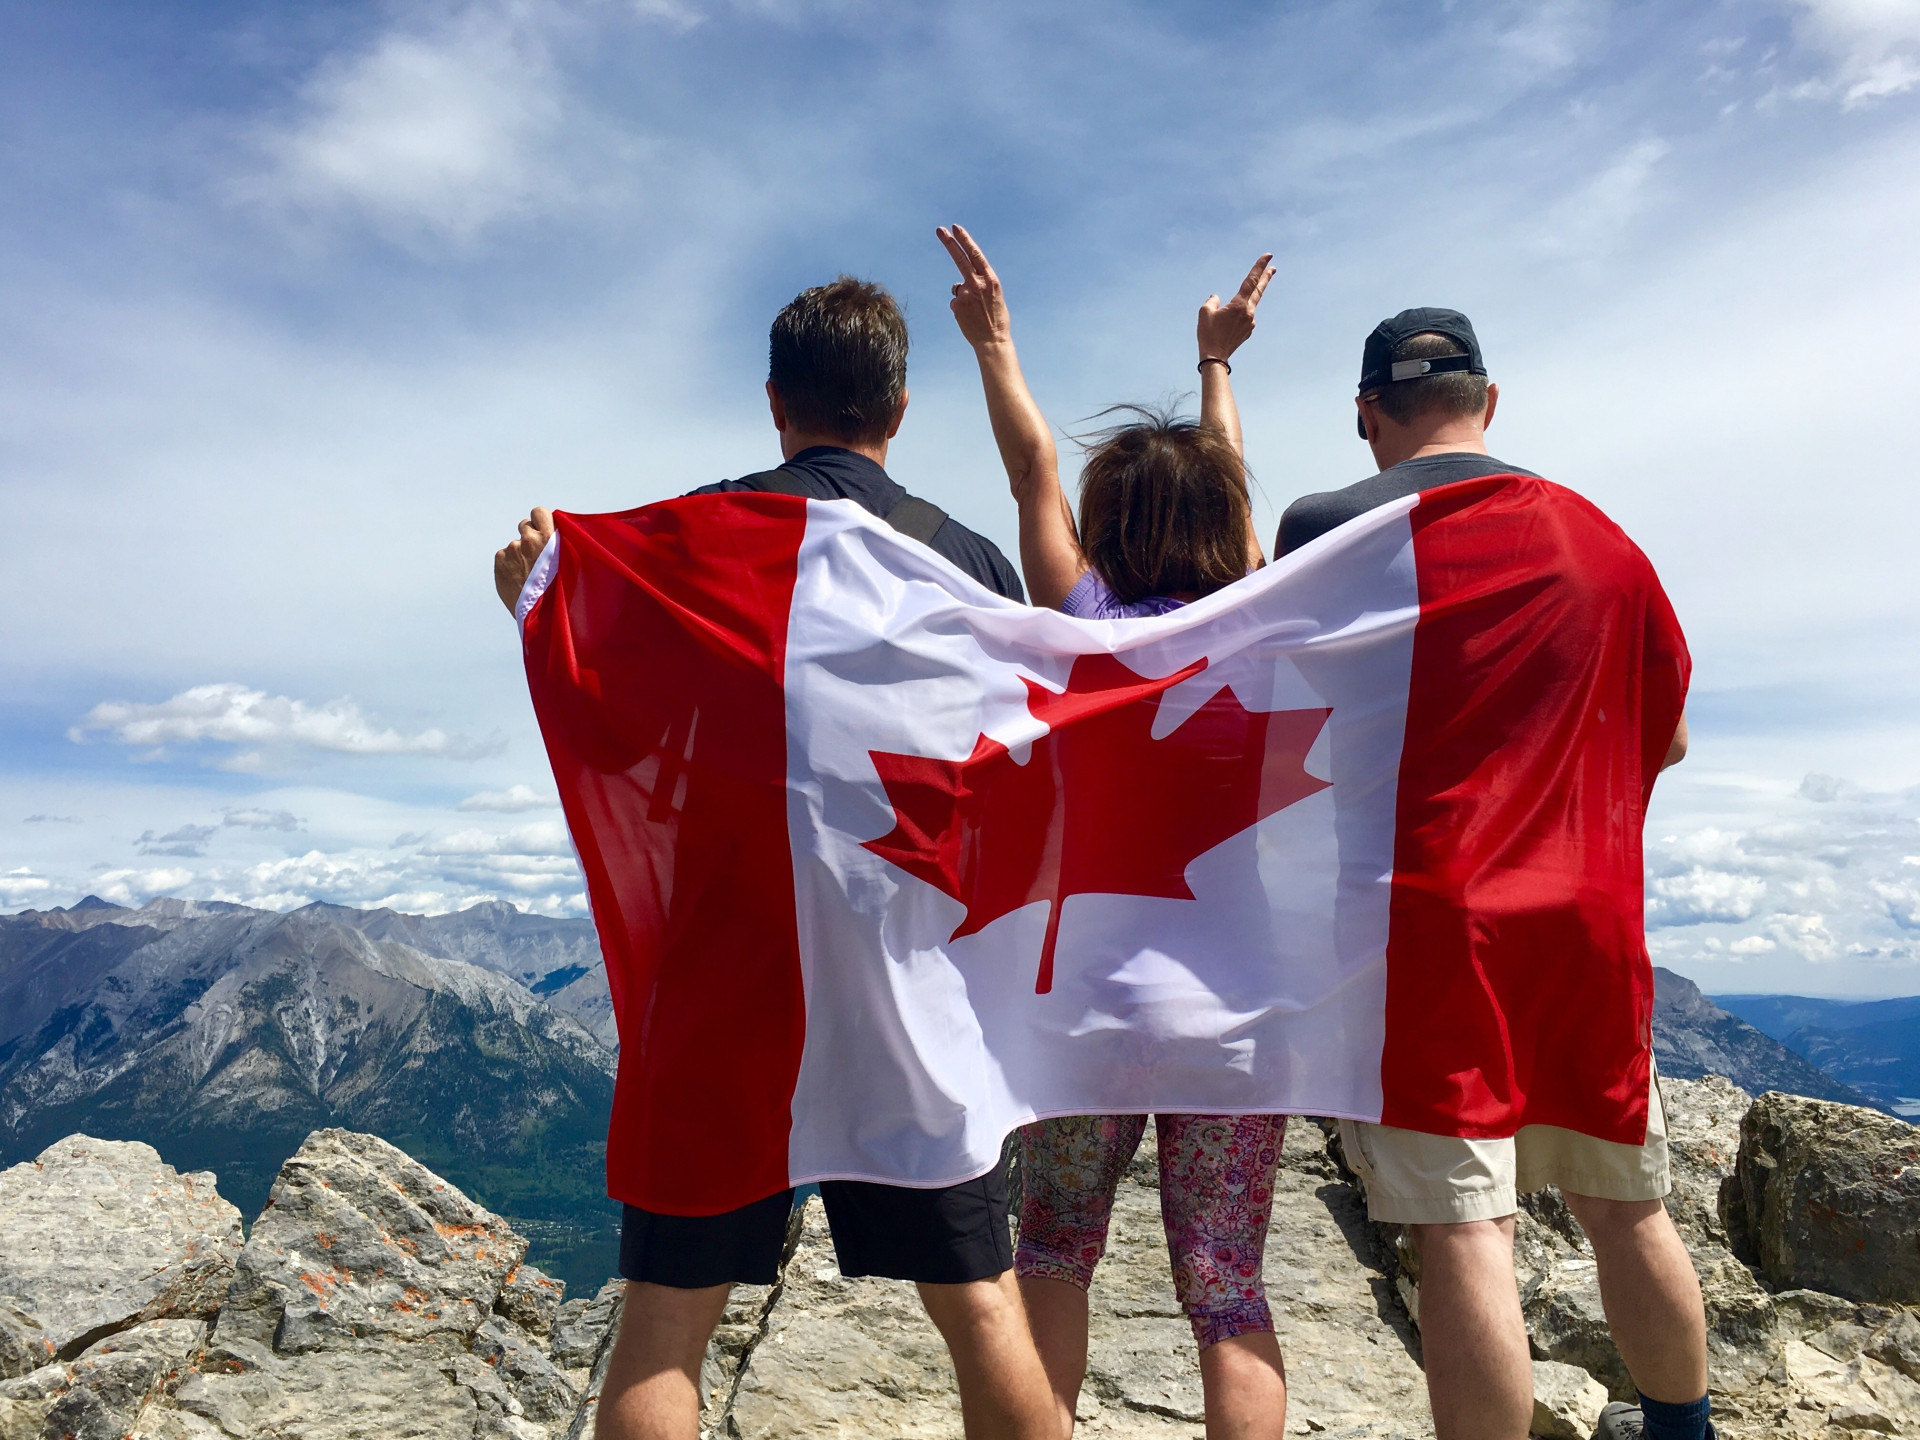 <p>Score: 6.900</p> <p>Canada went down two positions but remains strong in the middle of the pack. The country's low unemployment rates might have something to do with it.</p><p><a href="https://www.msn.com/en-ca/community/channel/vid-7xx8mnucu55yw63we9va2gwr7uihbxwc68fxqp25x6tg4ftibpra?cvid=94631541bc0f4f89bfd59158d696ad7e">Follow us and access great exclusive content every day</a></p>